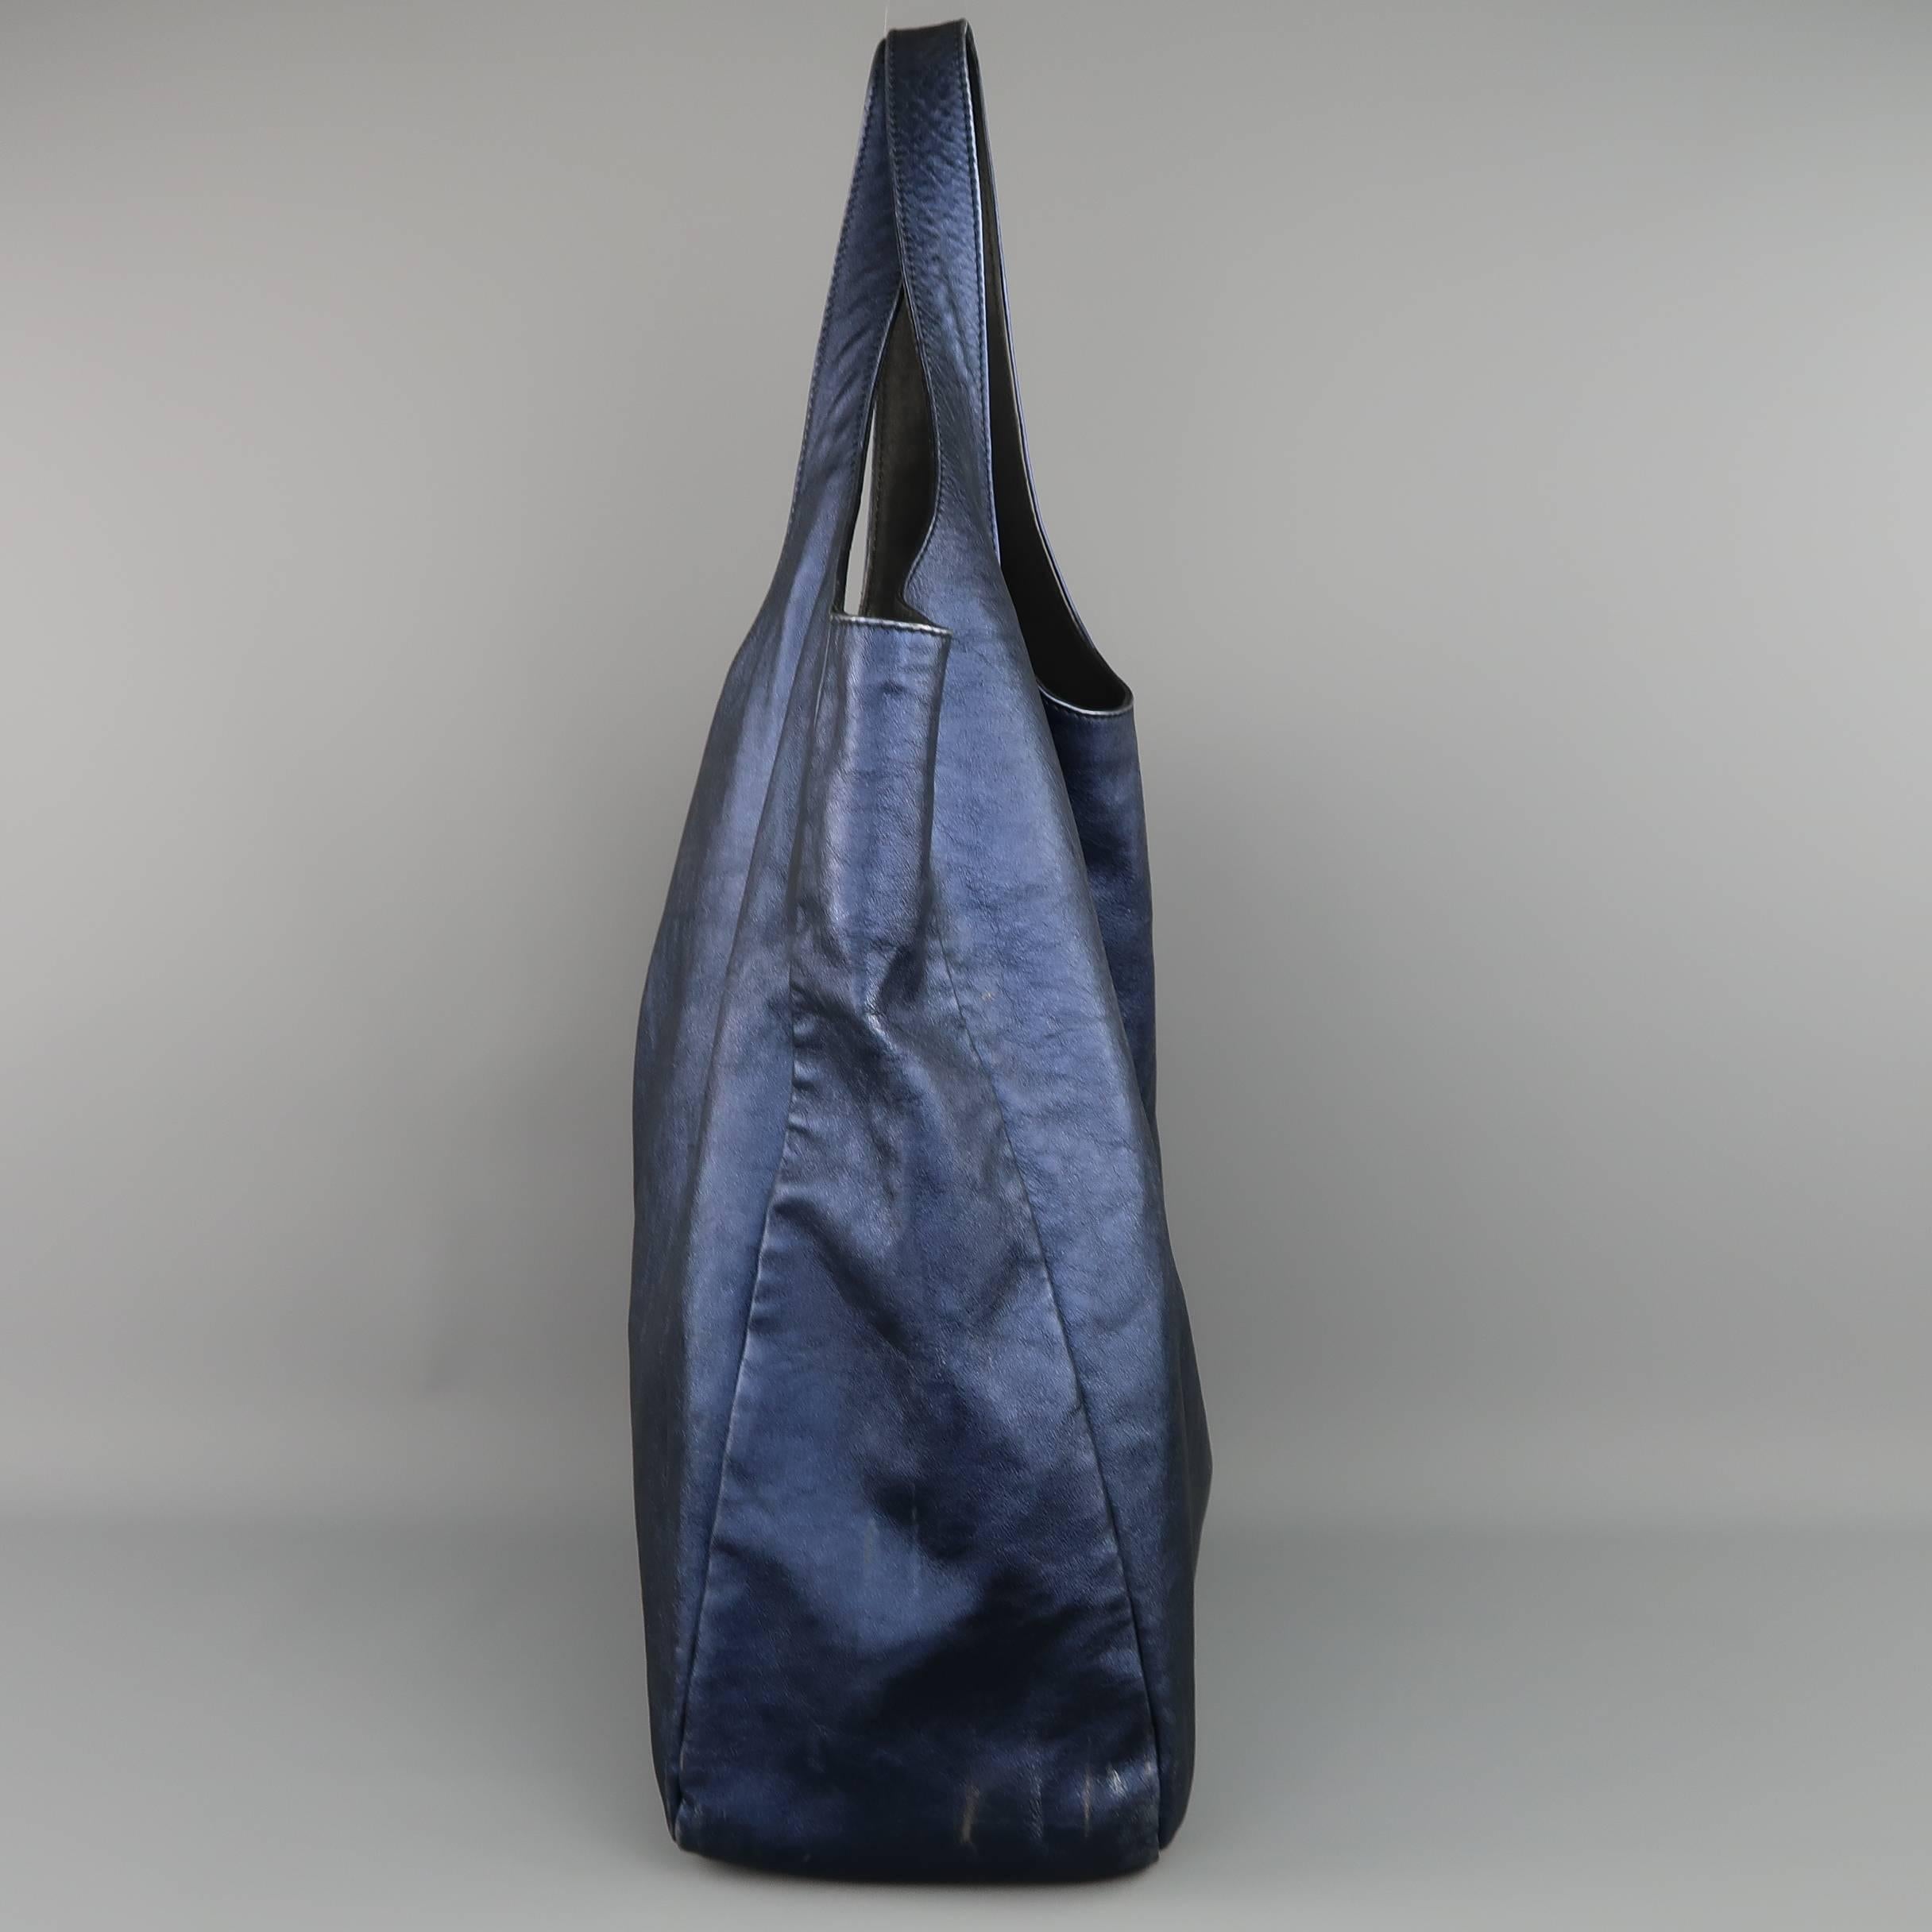 Burberry Prorsum Metallic Navy Leather Shoulder Tote Bag, Spring 2013 Collection In Fair Condition In San Francisco, CA